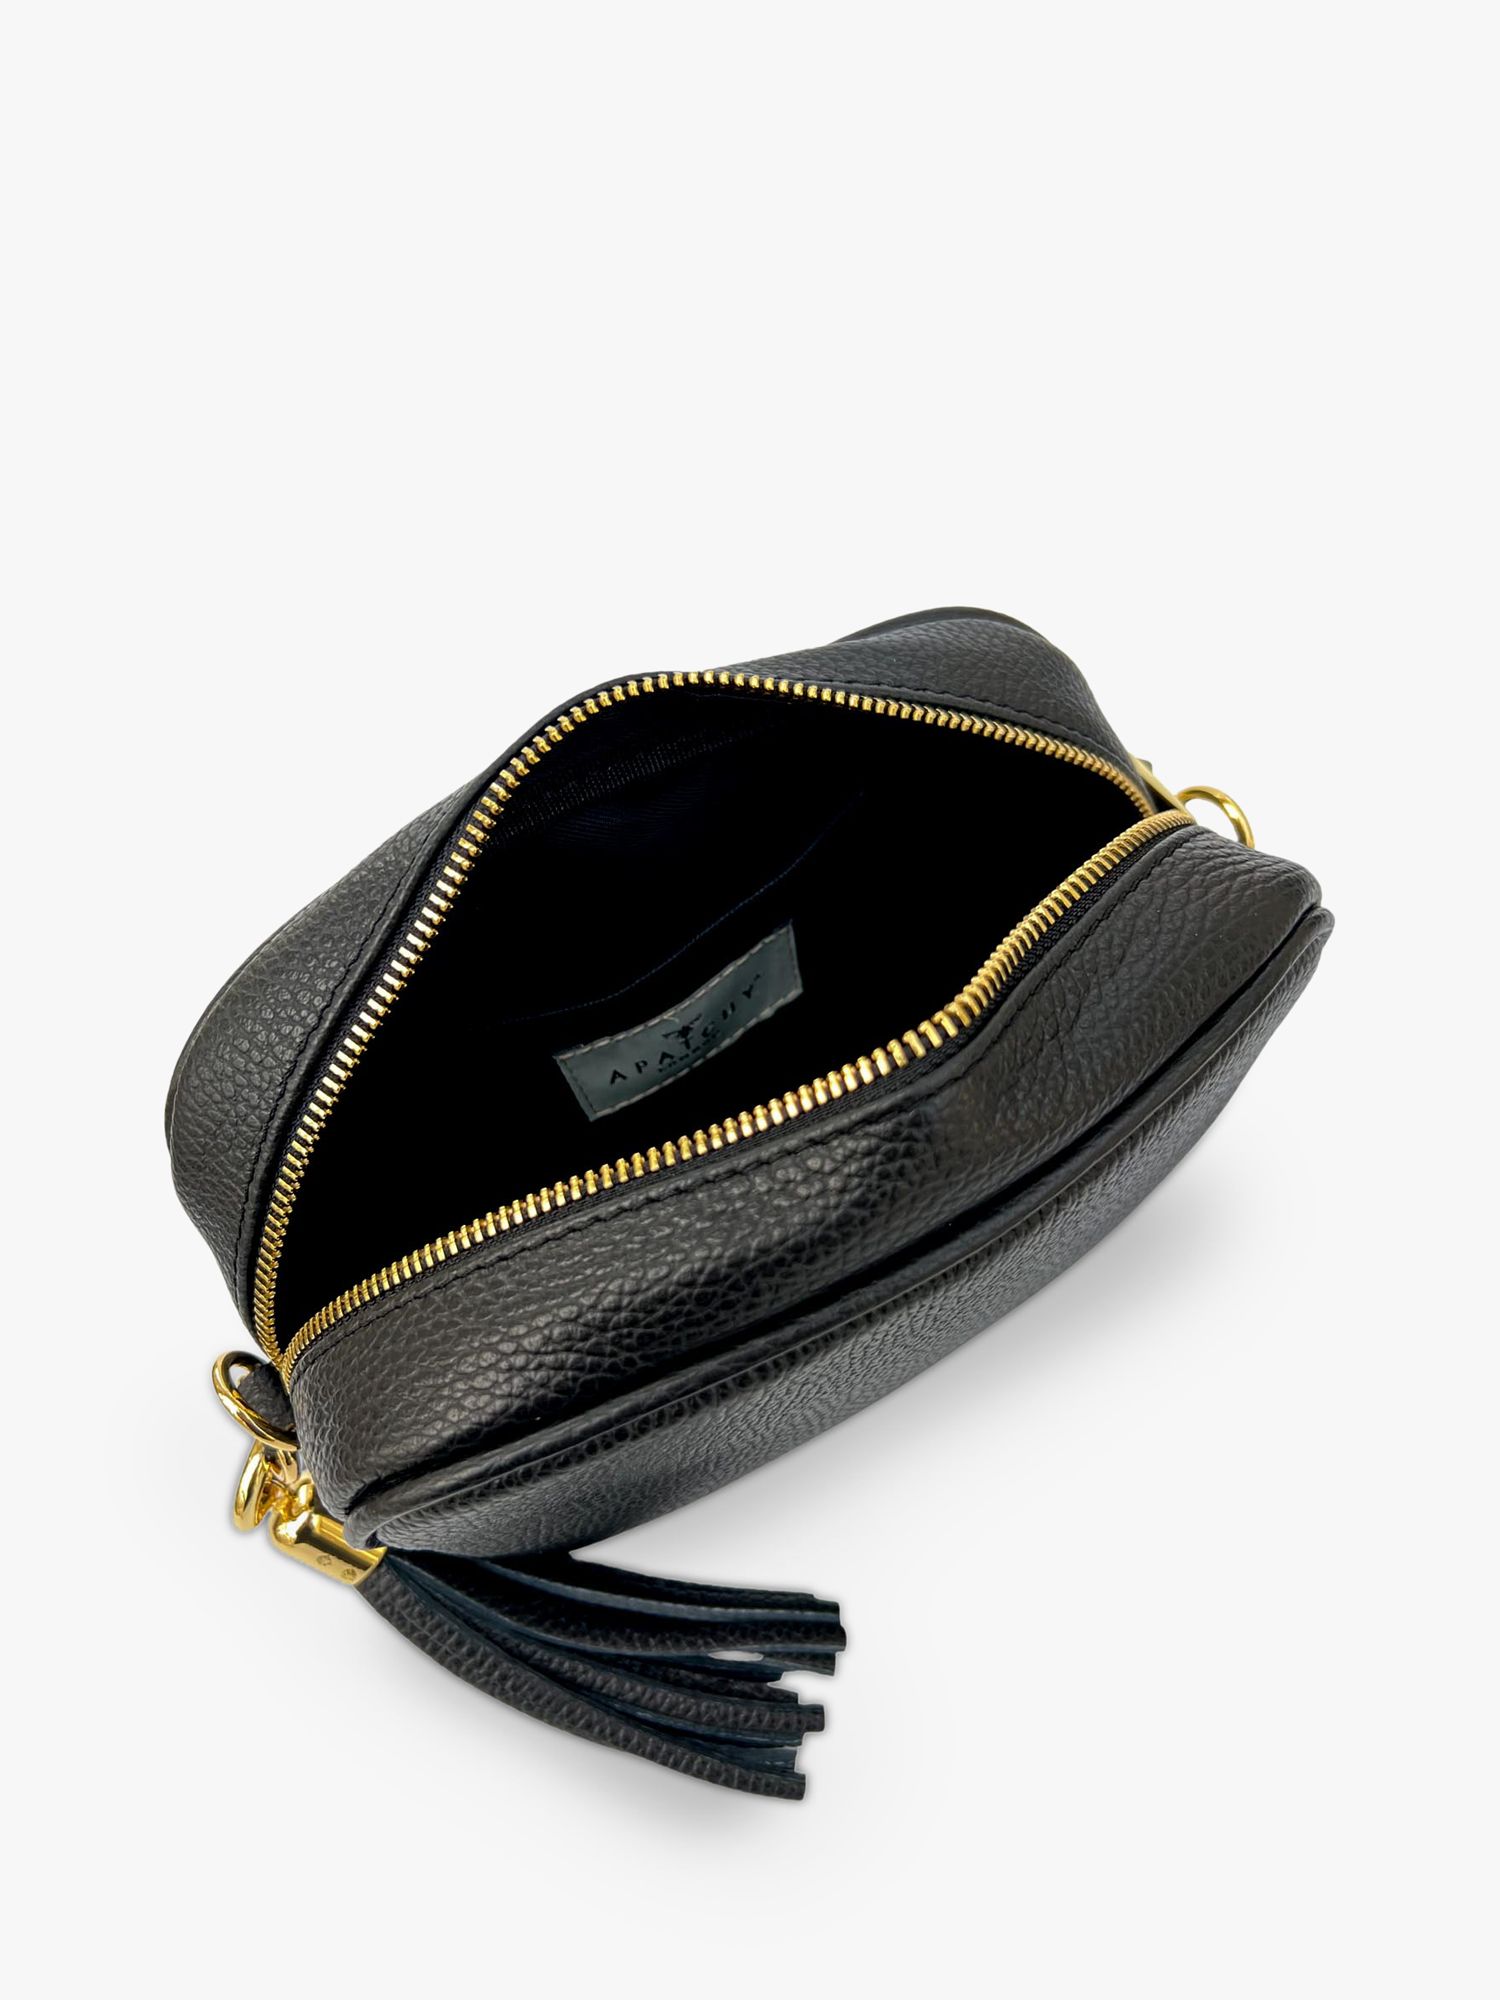 Buy Apatchy Chevron Strap Leather Cross Body Bag Online at johnlewis.com